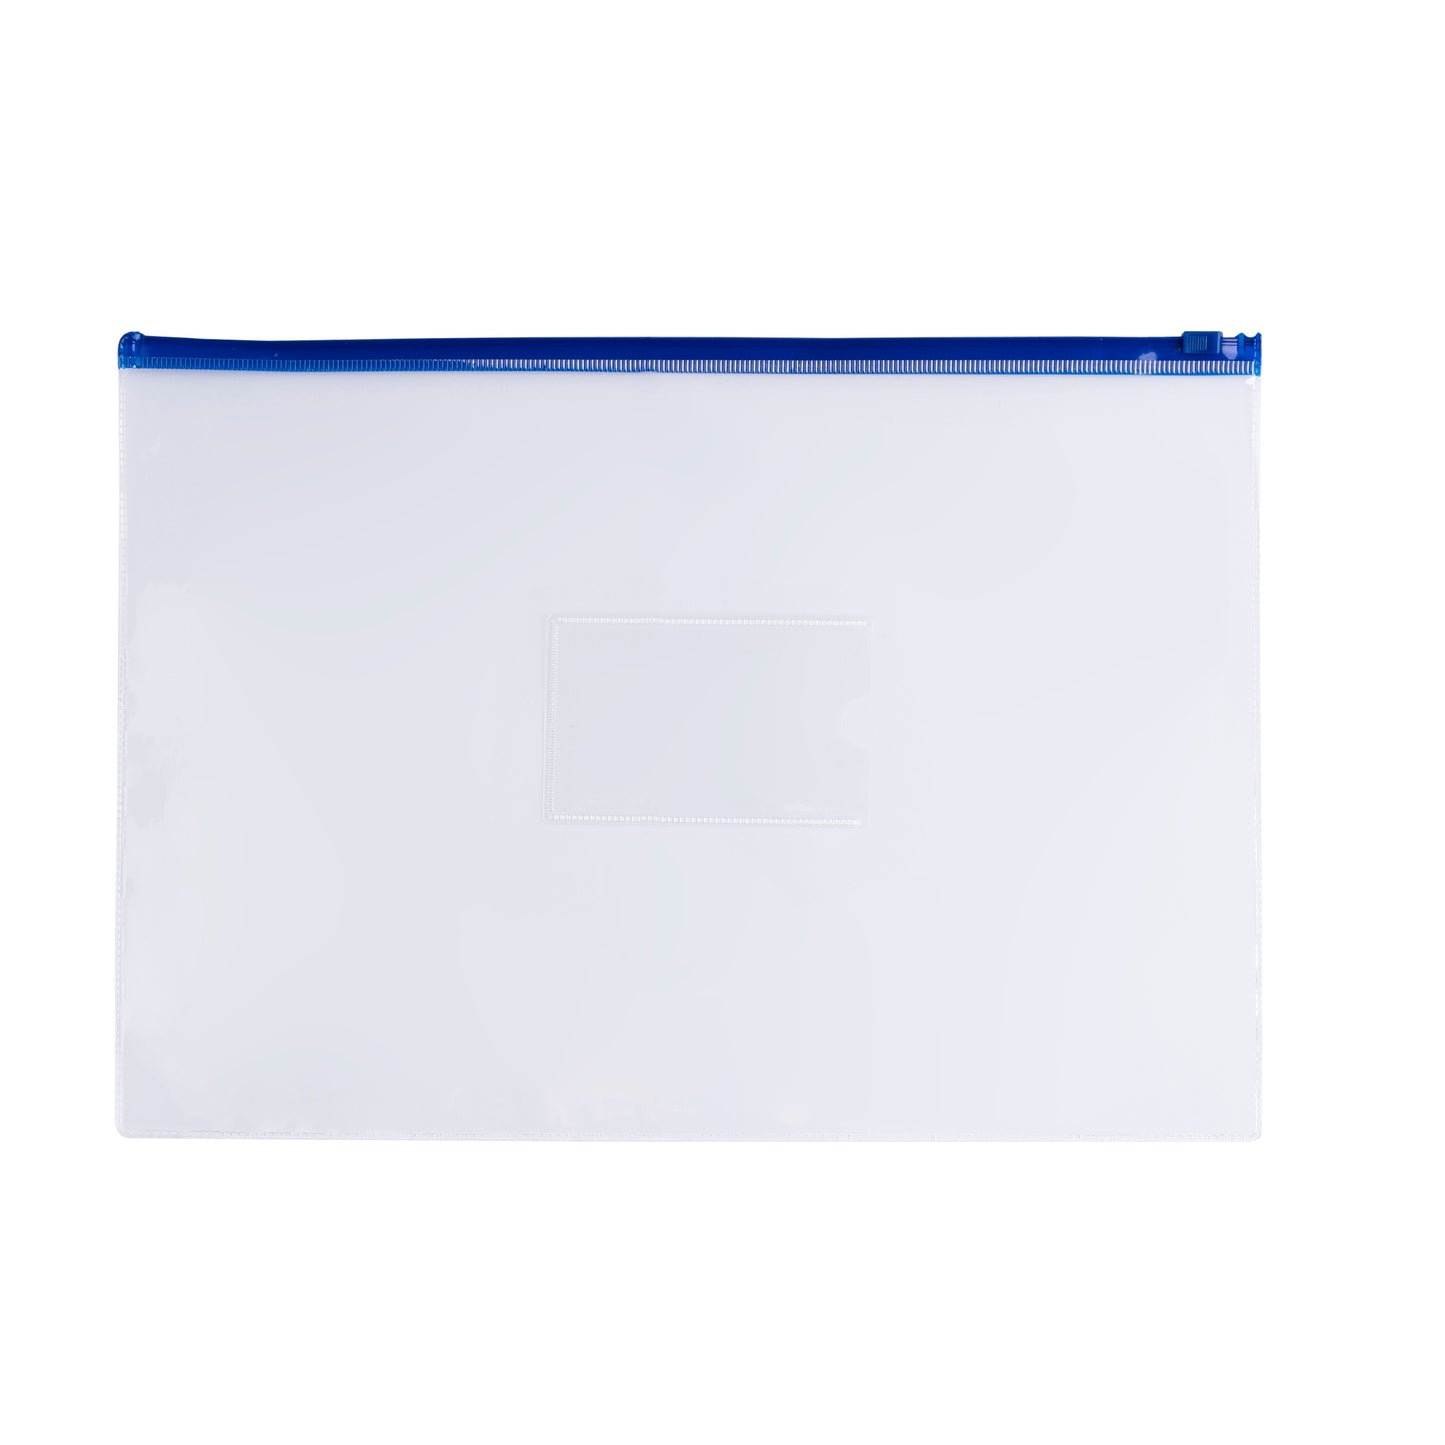 Pack of 12 A6 Clear Zippy Bags with Blue Zip